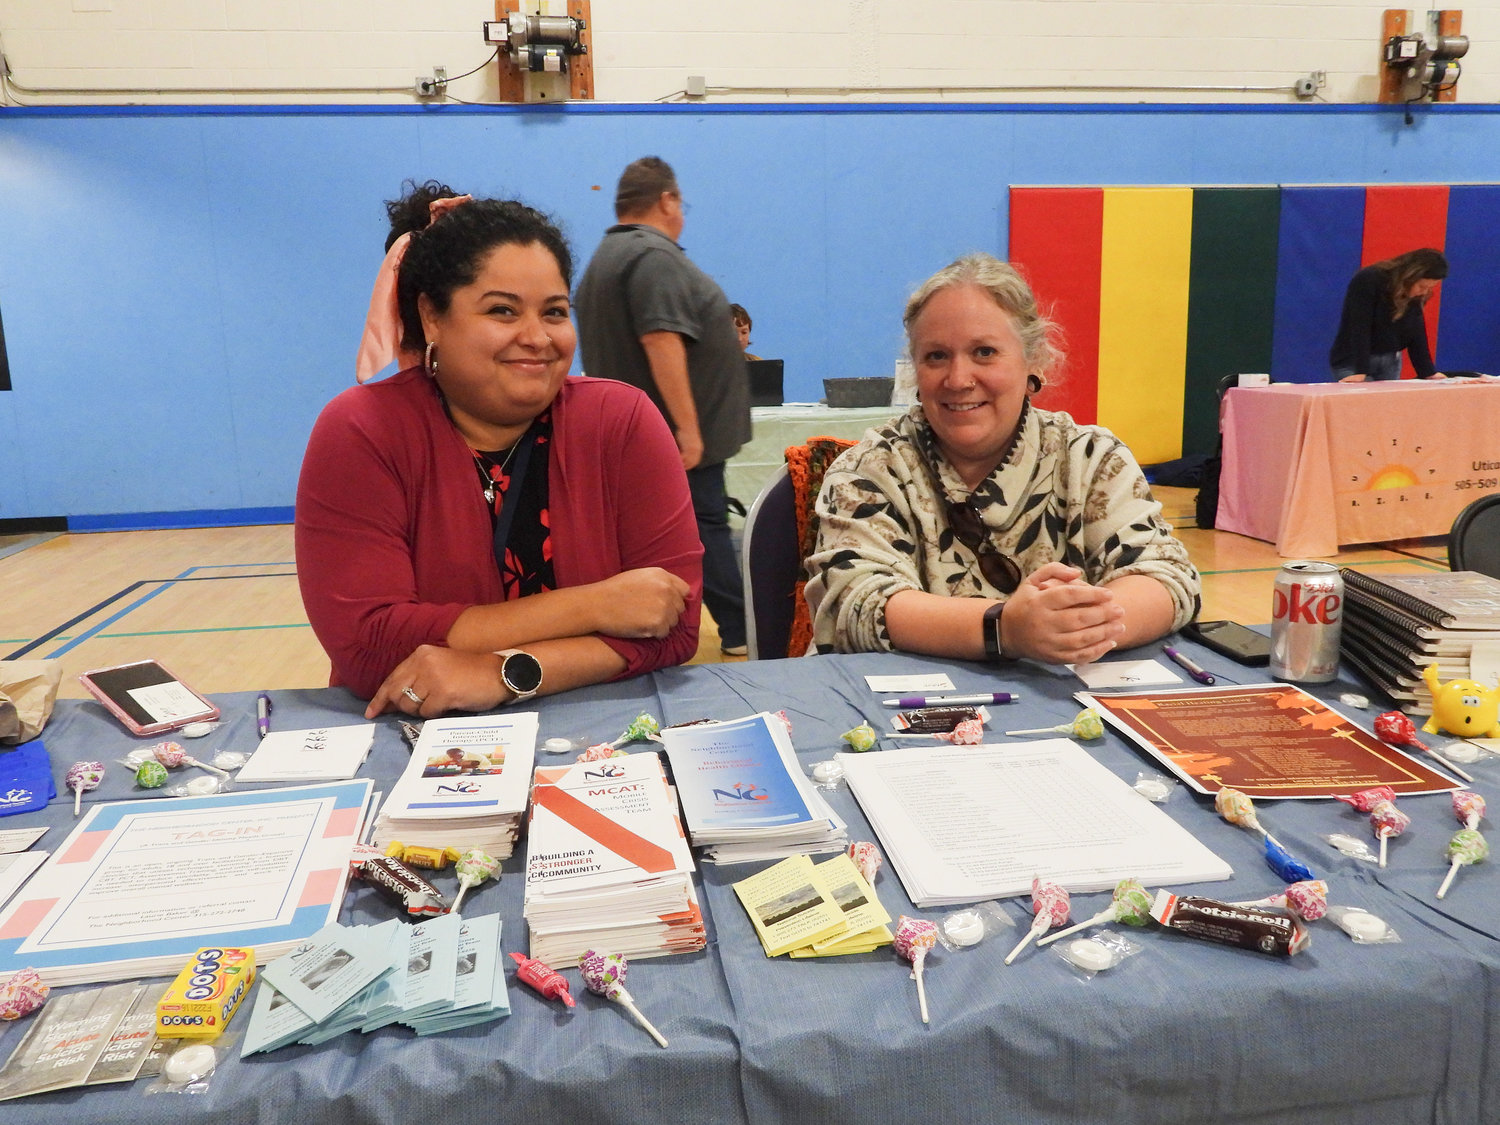 Jahnae Roberts, LMSW, left, and Stacy Bisgrove, LMHC, of The Neighborhood Center, attend the inaugural Community Partner Vendor Fair on Saturday, Sept. 24